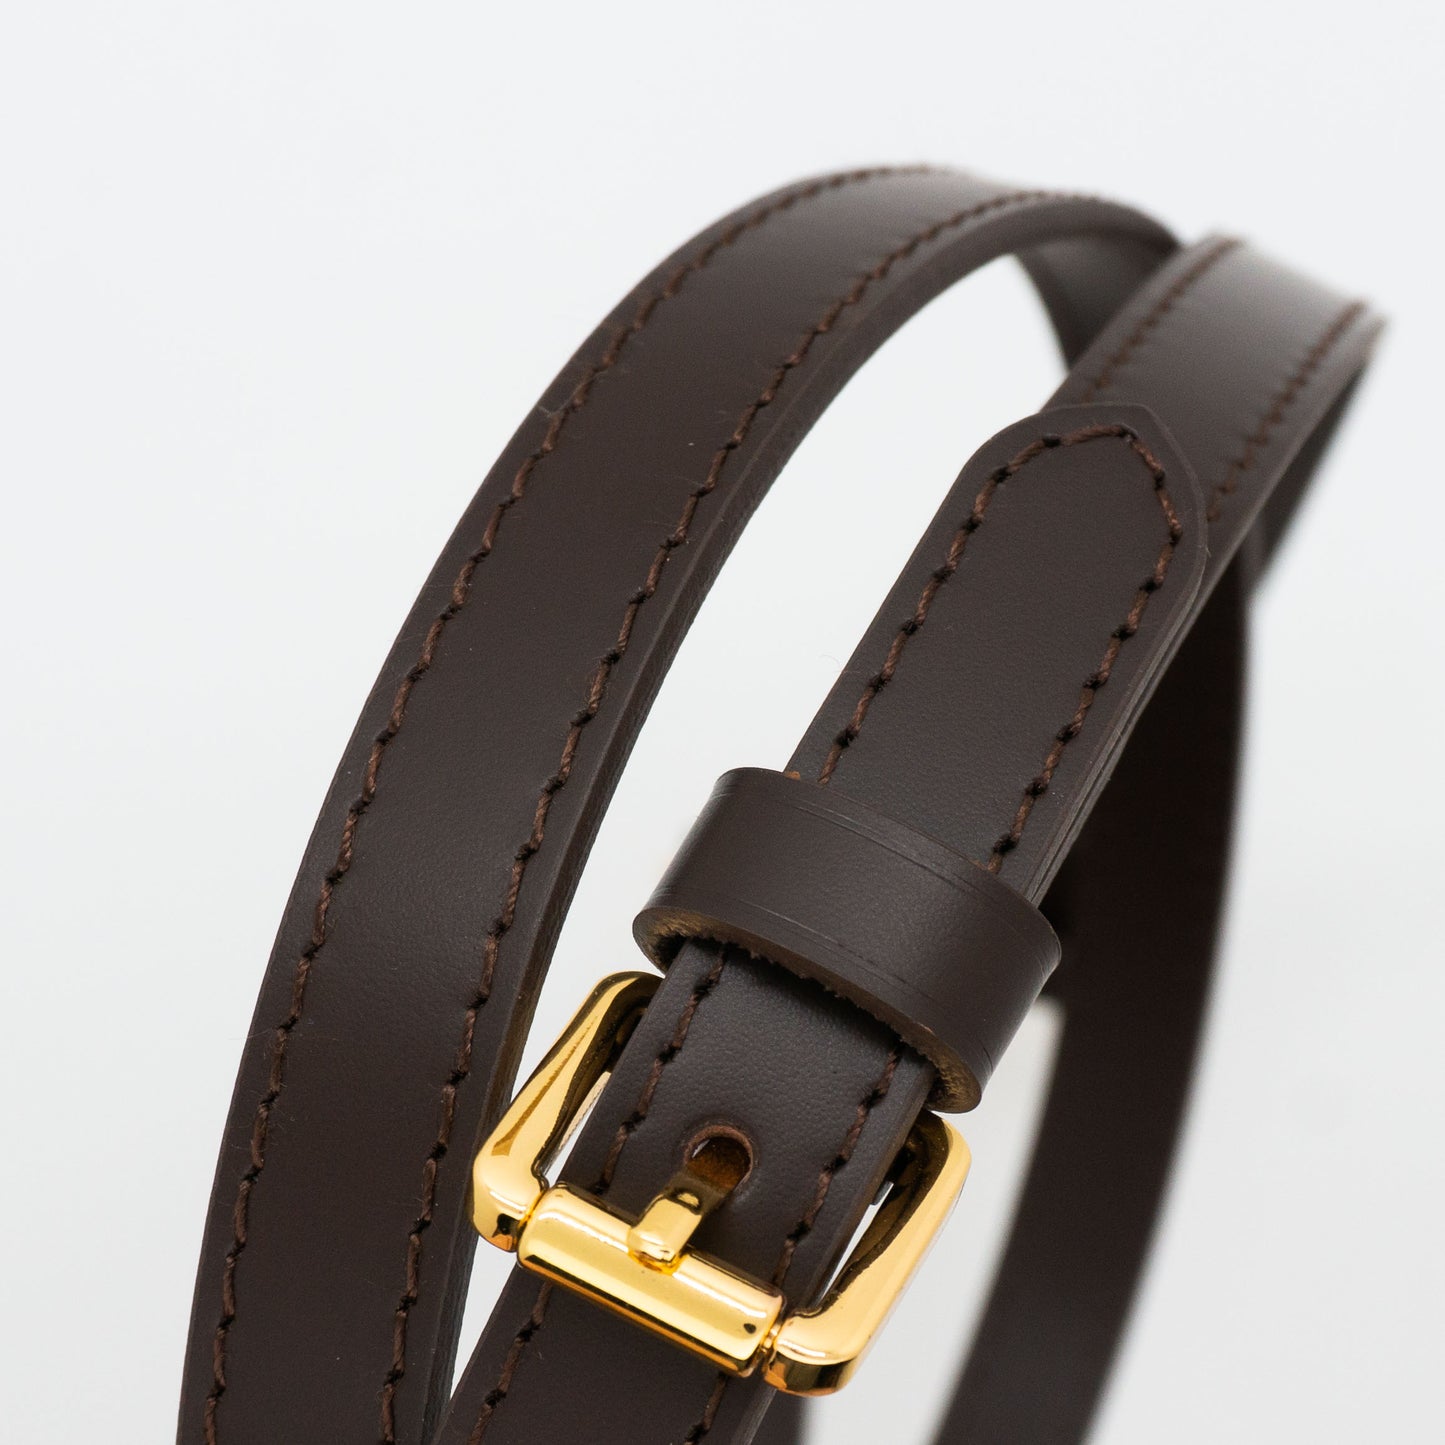 Adjustable Leather Strap in treated leather - 1.45cm wide